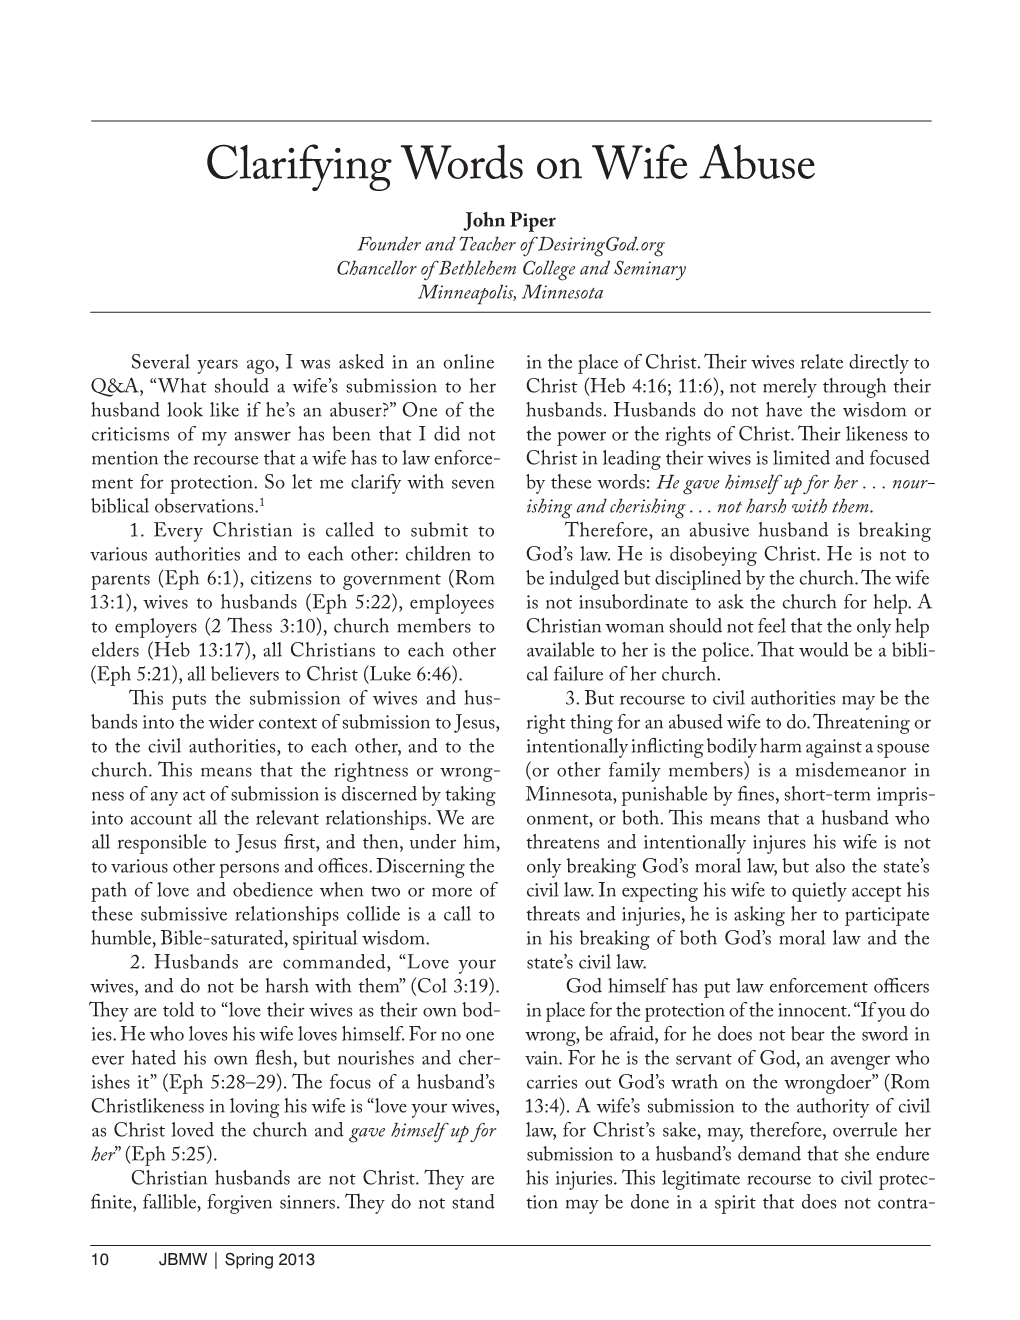 John Piper, “Clarifying Words on Wife Abuse,”